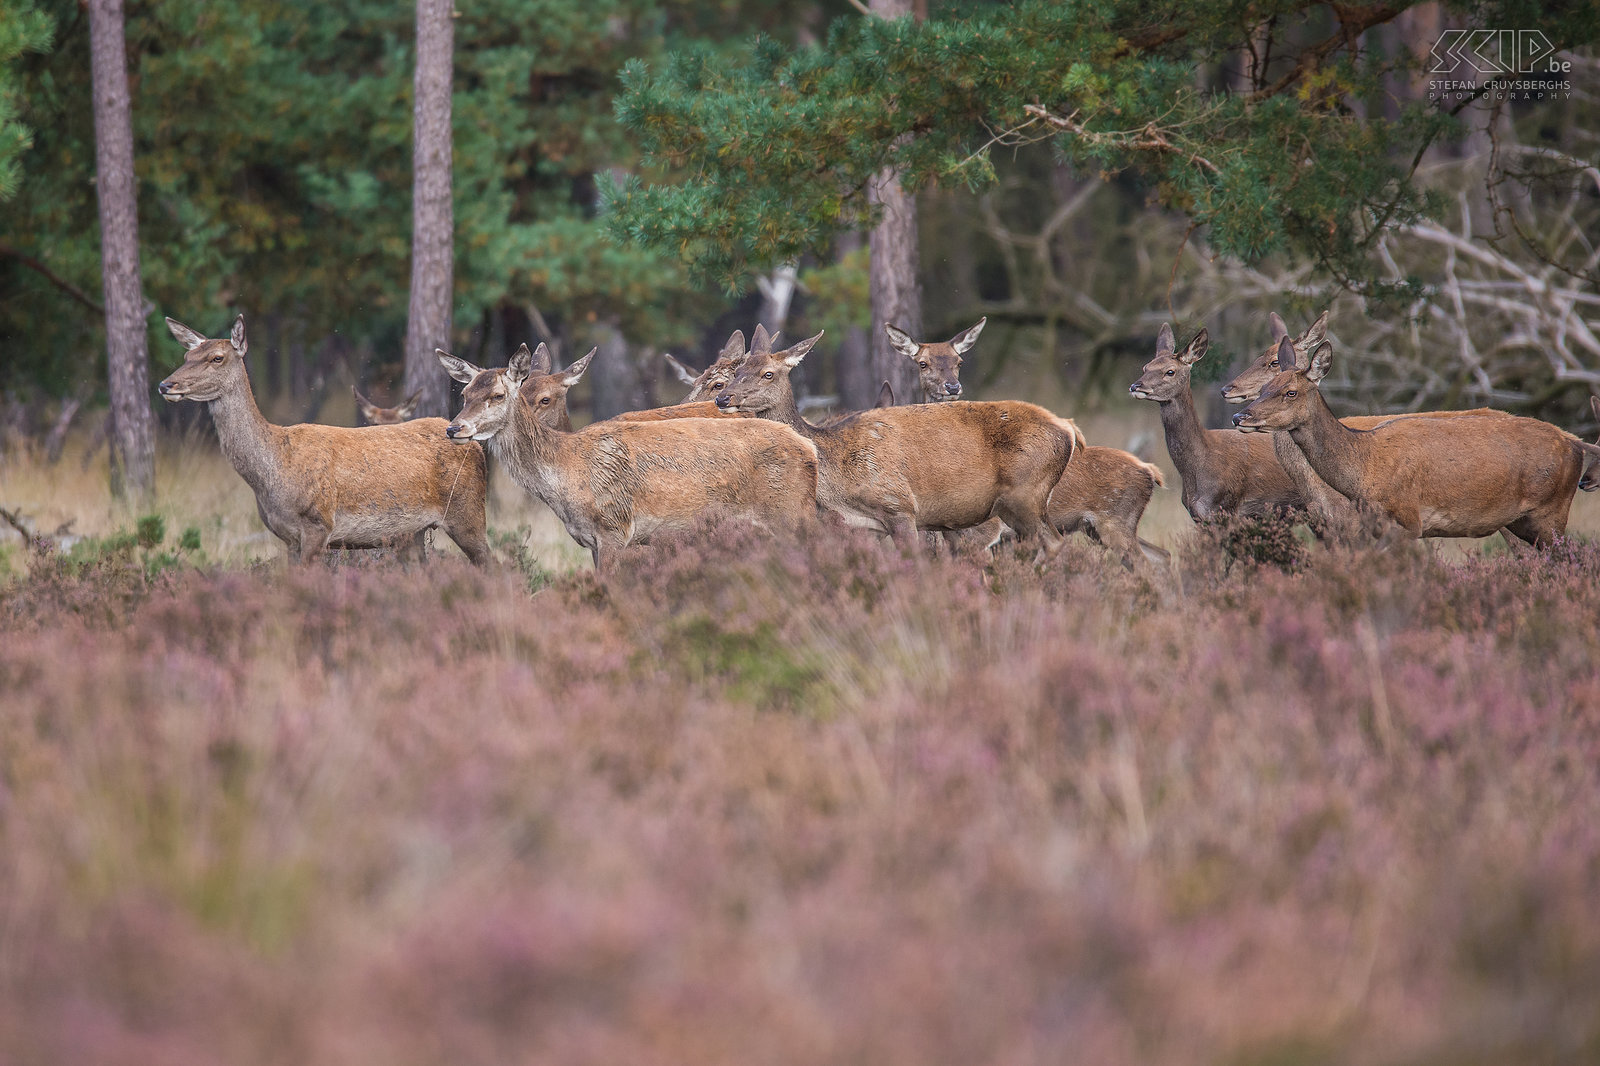 Rutting season in Hoge Veluwe - Hinds Every year the rutting season of the red deer (Cervus elaphus) starts at the end of September. We went one day to the beautiful Hoge Veluwe National Park in the Netherlands. The park is home to almost 200 red deer. During the rutting season the males, known as stags, leave their male herds and will search for females. The females also live in herds and are called hinds. At that time male red deer will have impressive antlers and they will grow a short neck mane. They start roaring and fighting with other males to impress the hinds. We had a nice evening despite of the hundreds of other nature photographers who also visited the park.<br />
 Stefan Cruysberghs